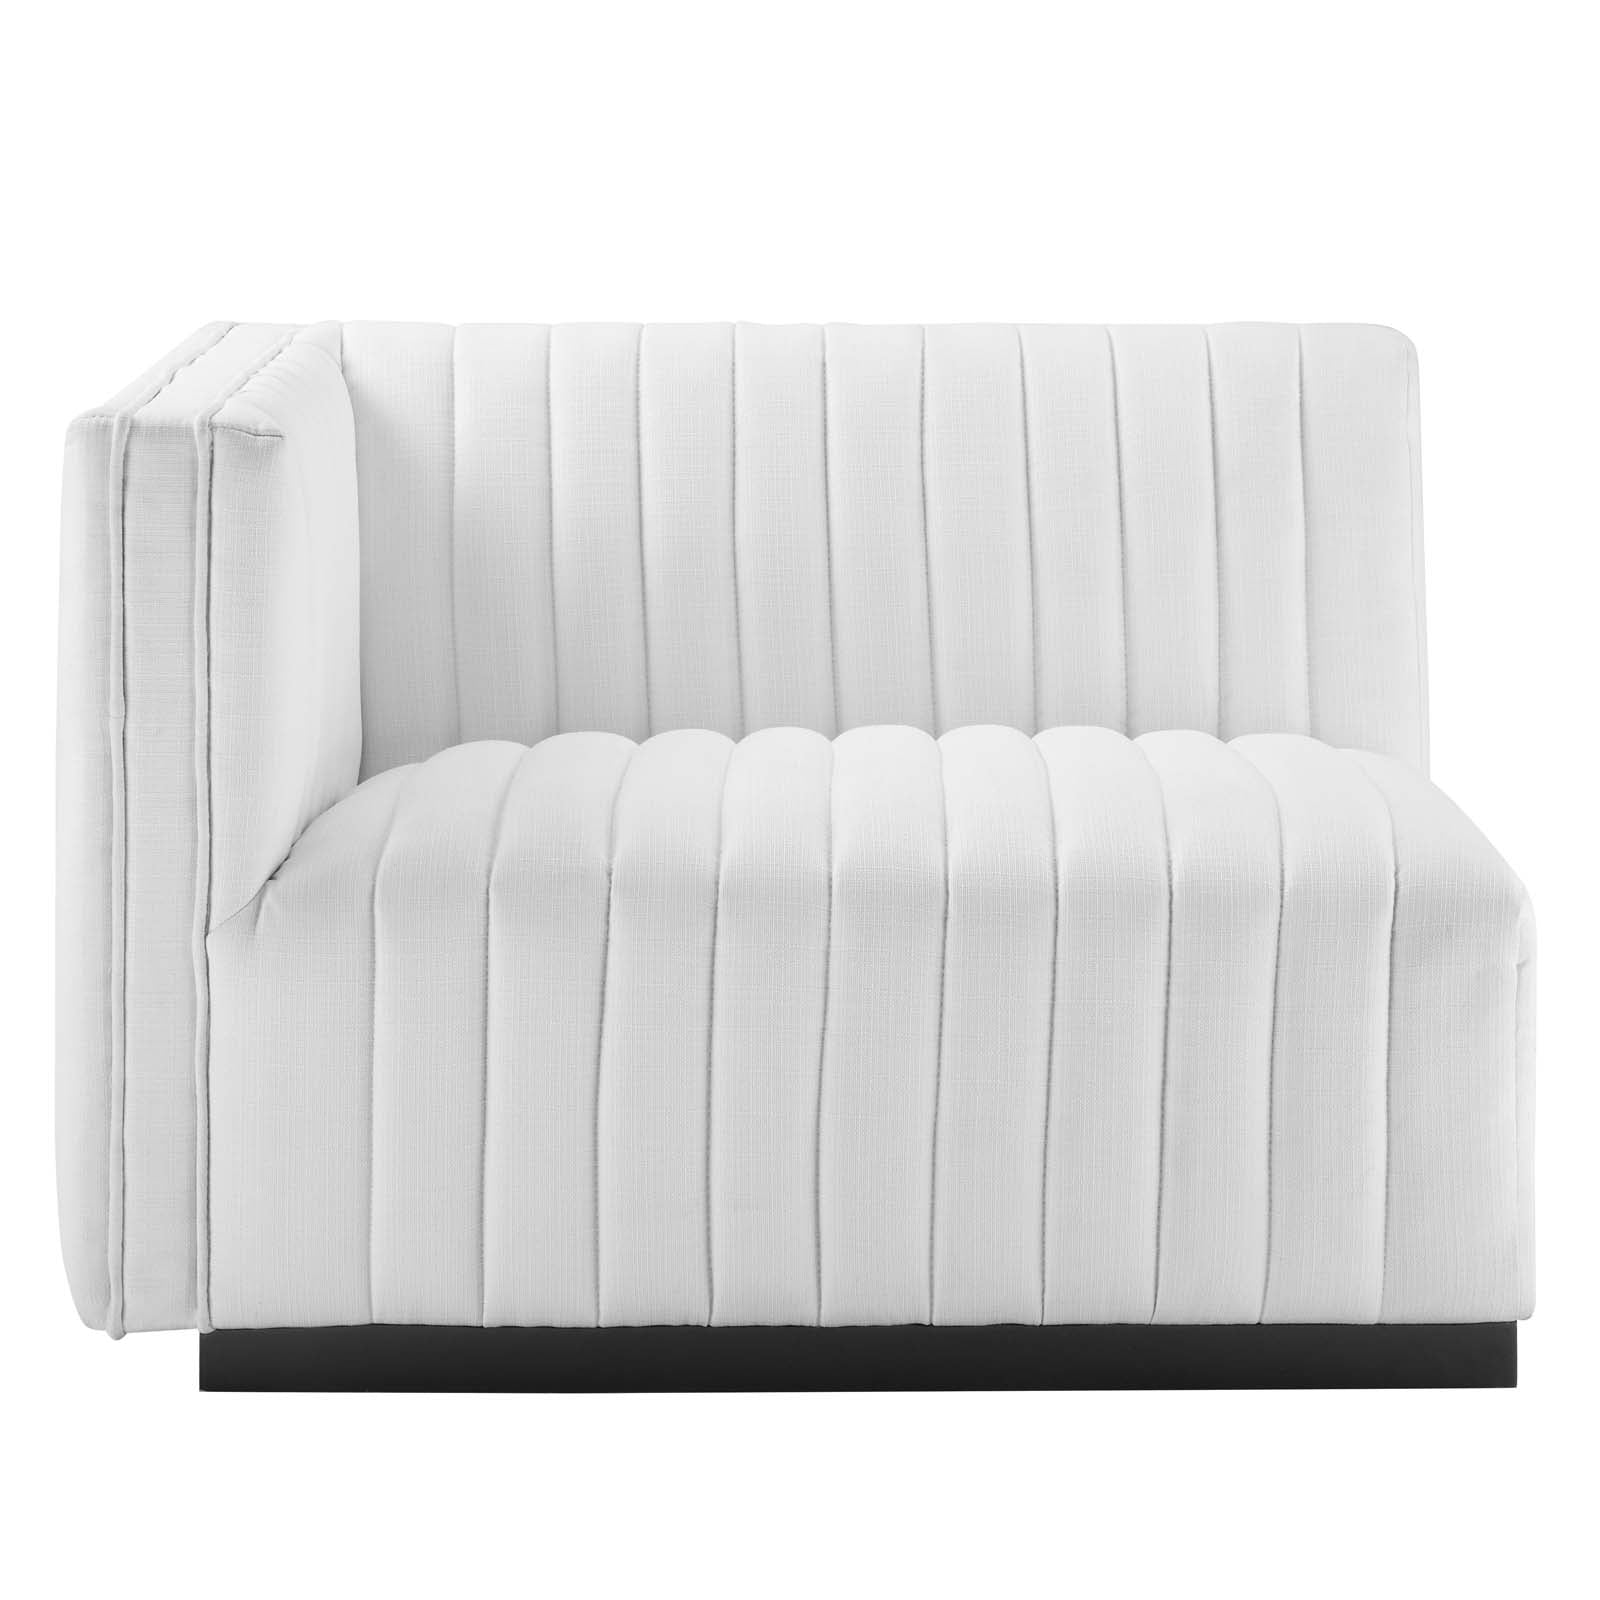 Modway Sectional Sofas - Conjure Channel Tufted Upholstered Fabric 4-Piece Sectional Sofa Black White